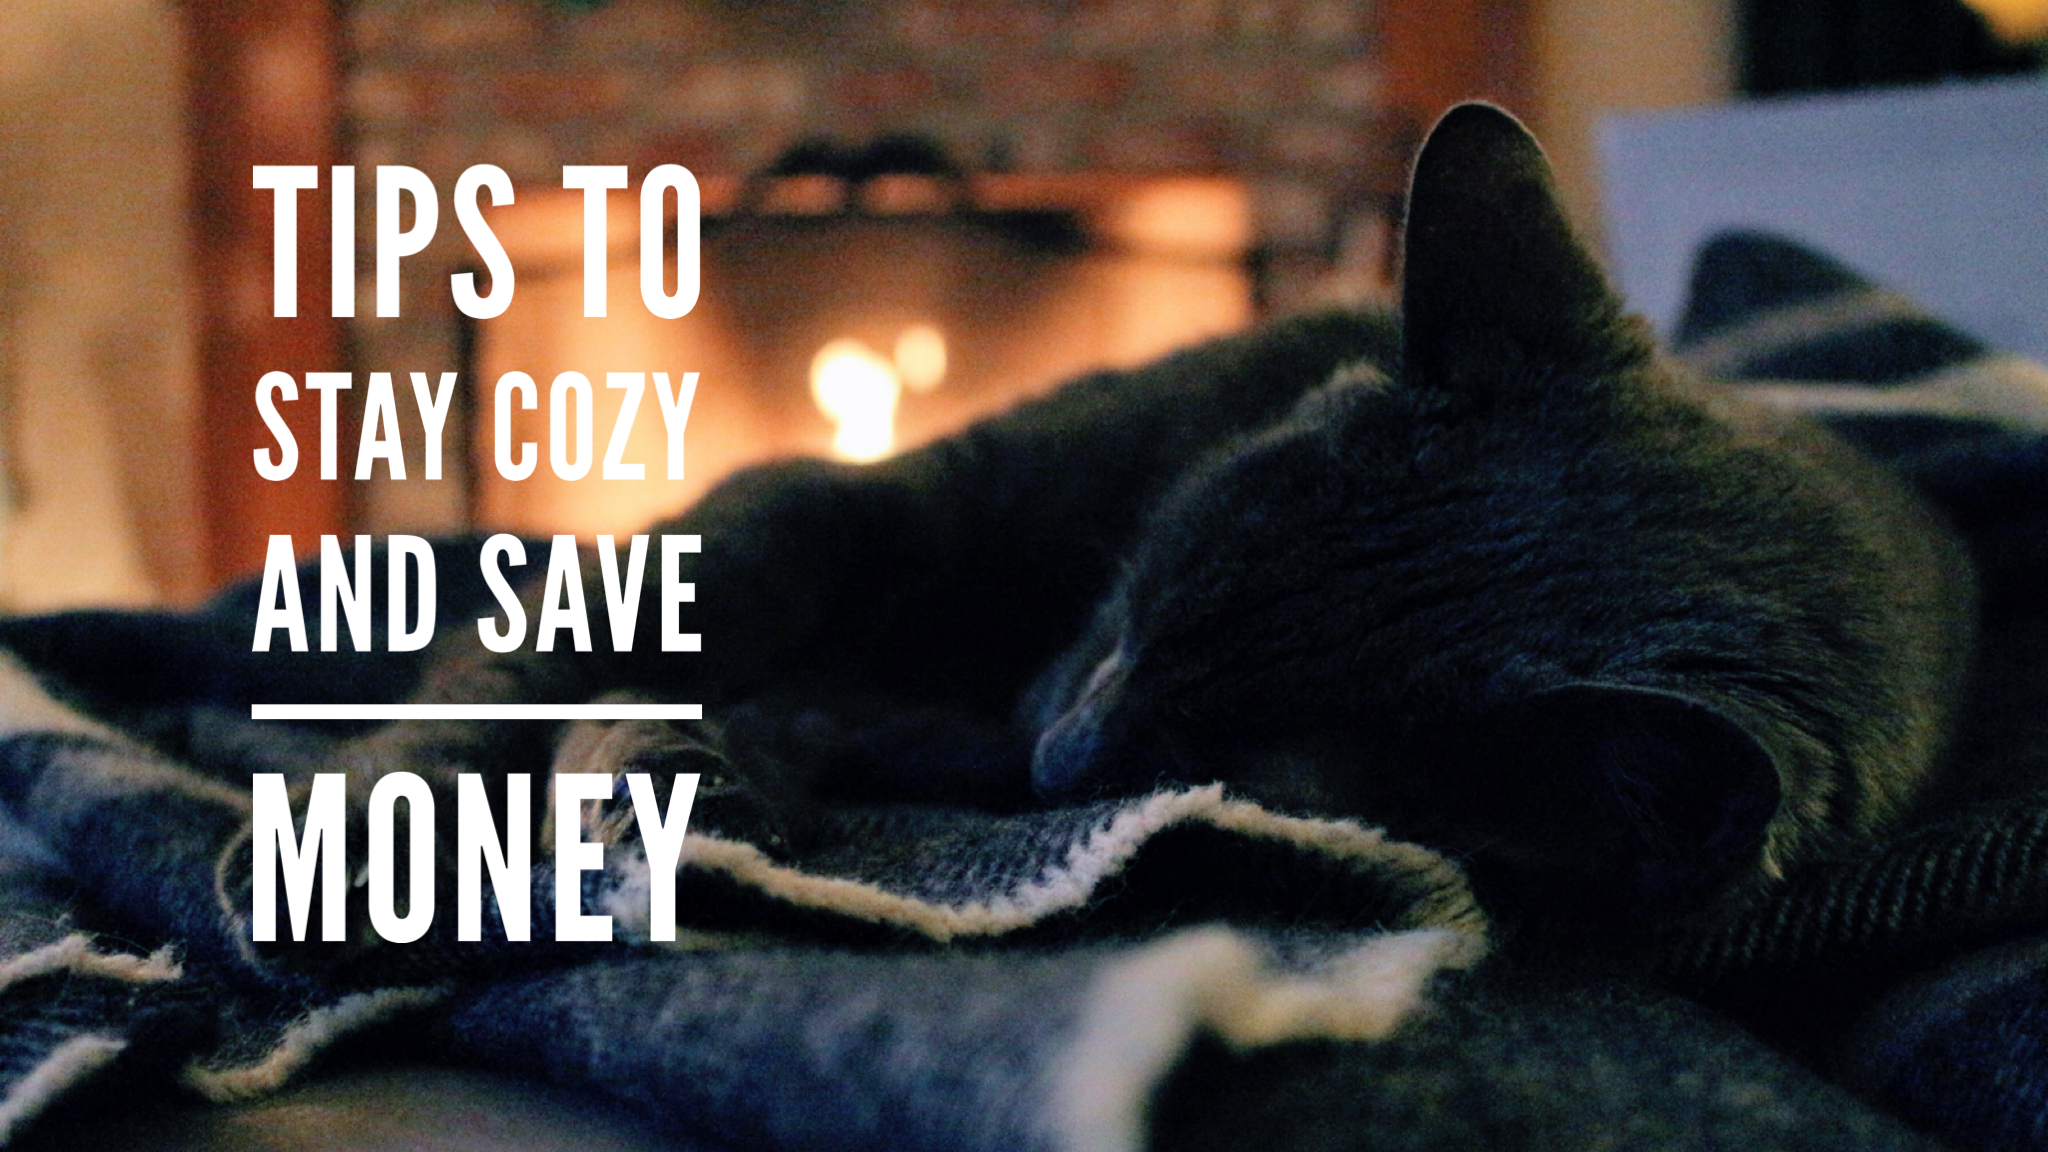 Stay Cozy and Save Money